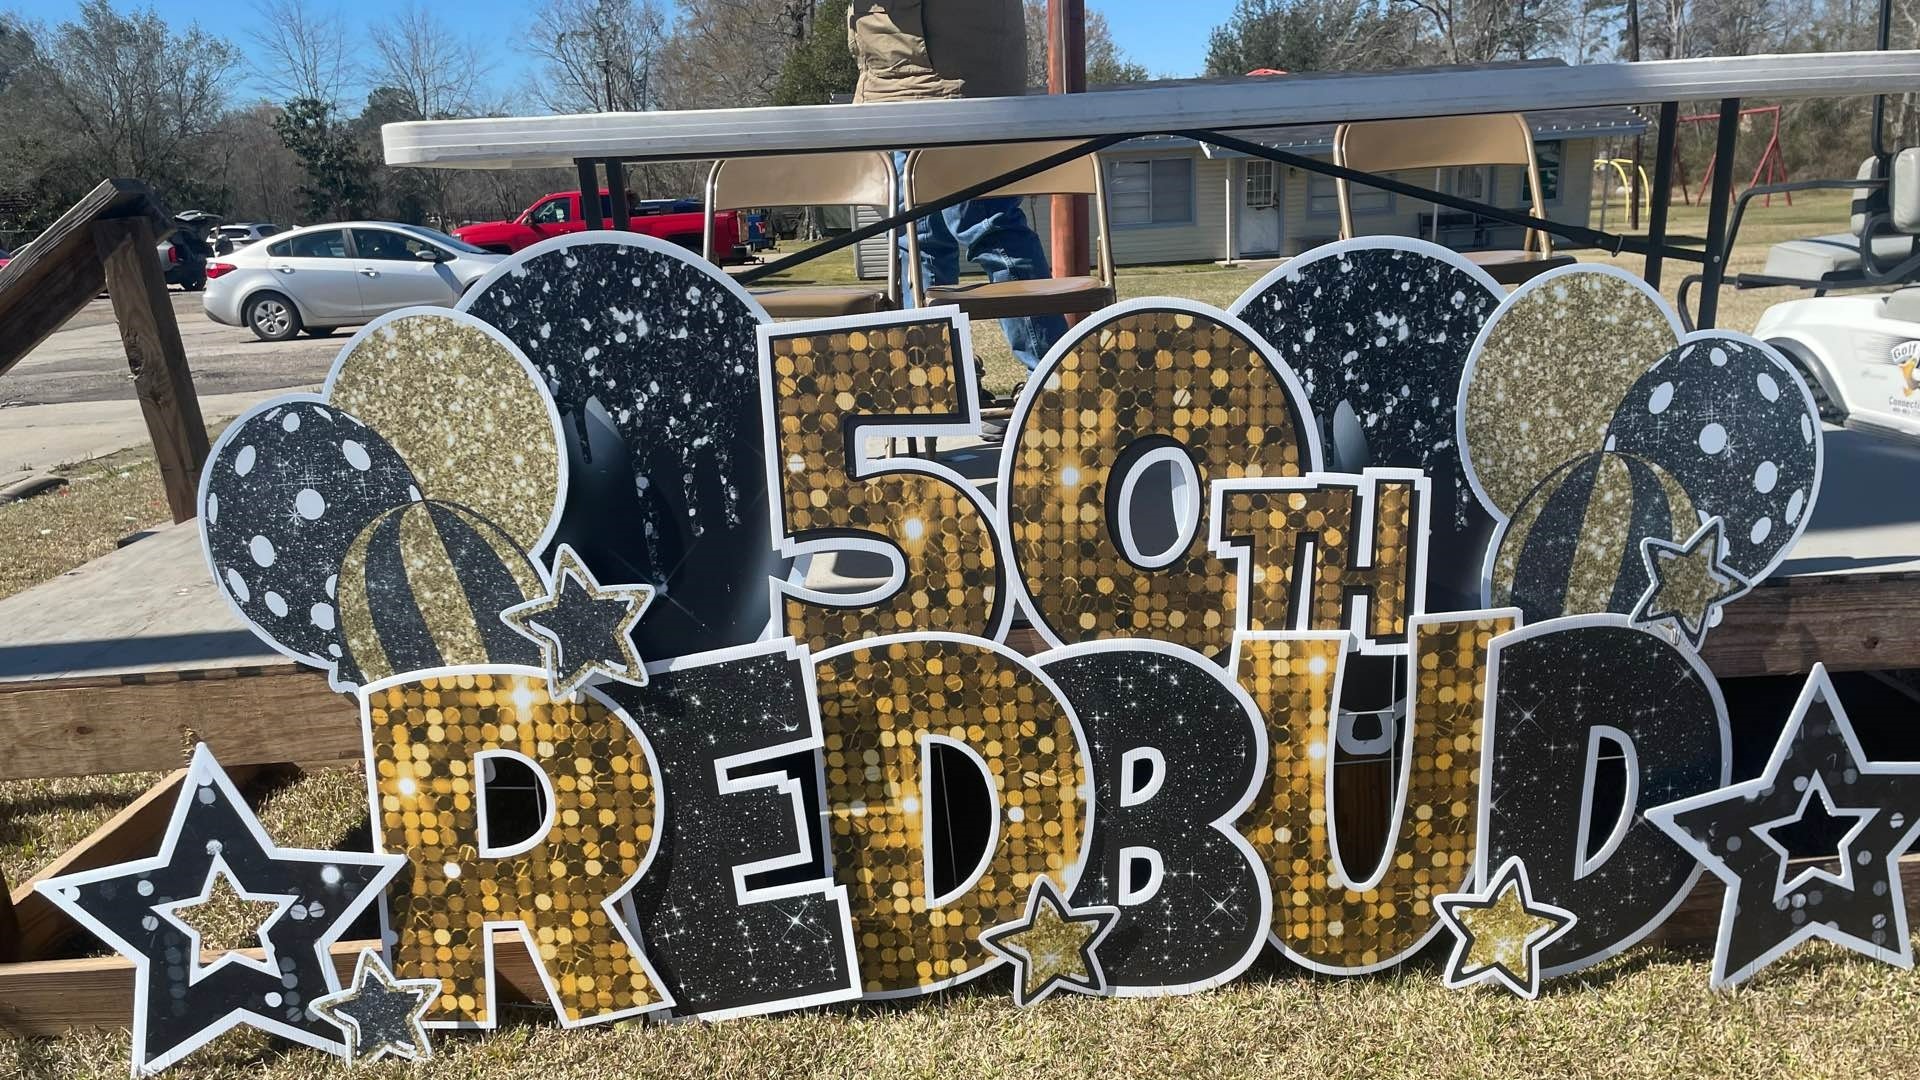 50th annual Buna Redbud Festival featured parade, carnival, live